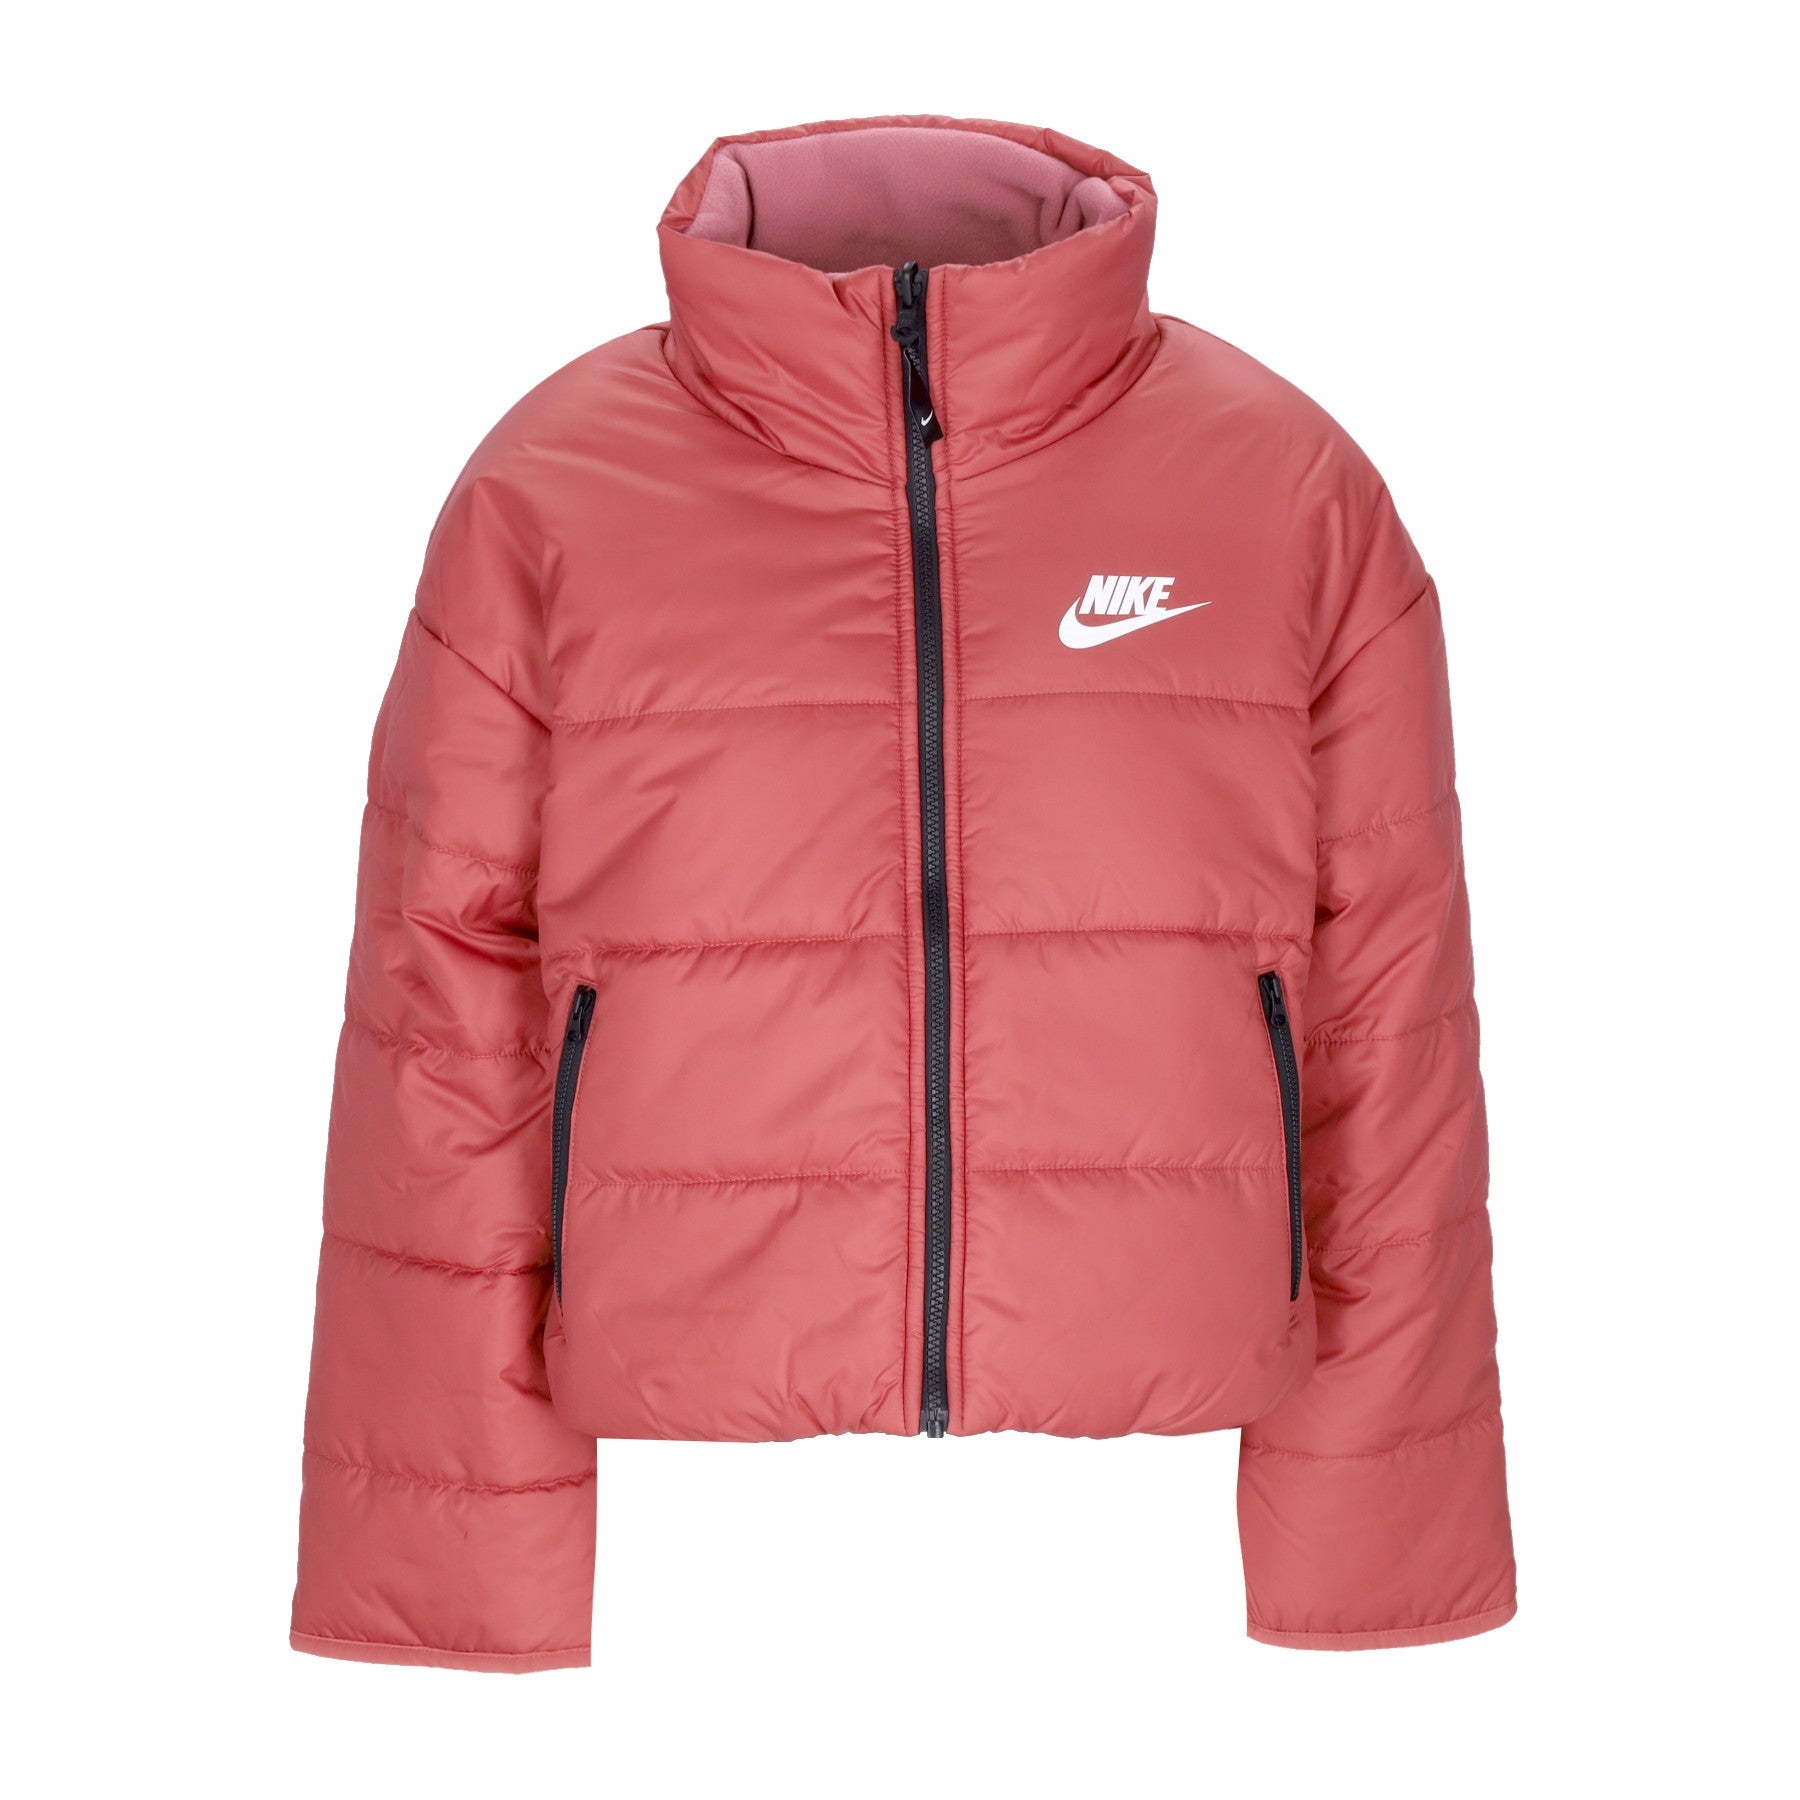 Nike, Piumino Donna Sportswear Therma-fit Repel Classic Jacket Reversible, Canyon Rust/desert Berry/black/white